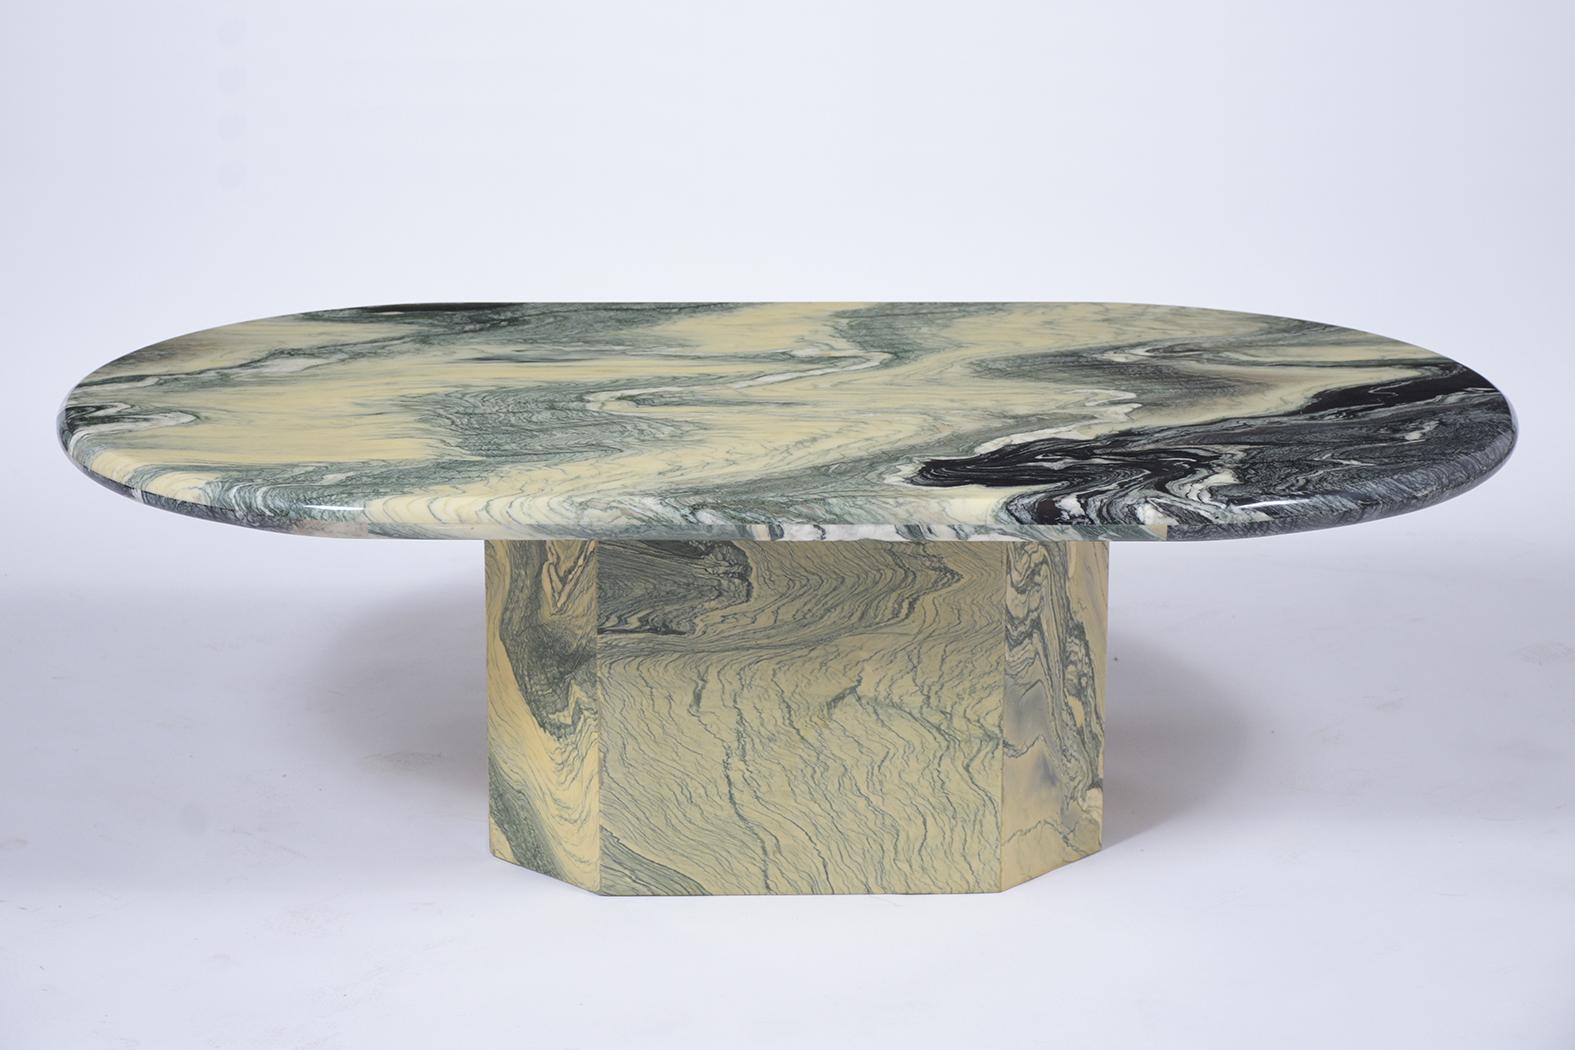 An Exceptional Italian Low Coffee Table handcrafted out of marble is in great condition. This fabulous piece features a beautiful wave pattern of dark green and light color, a unique oval top cocktail table, and sits on a sturdy octagonal base. This